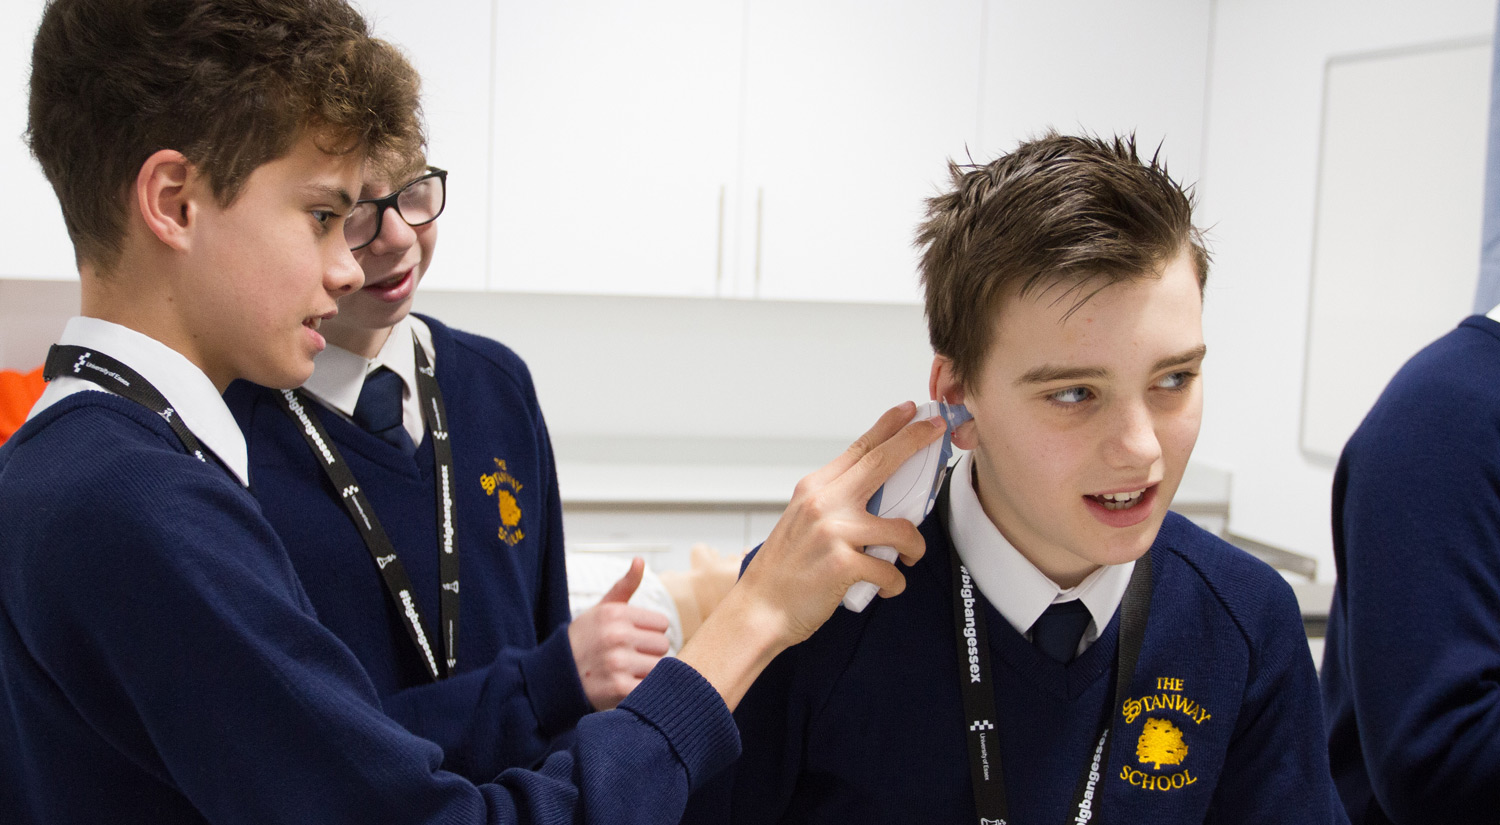 Need your ears testing? The students from The Stanway School are trained!